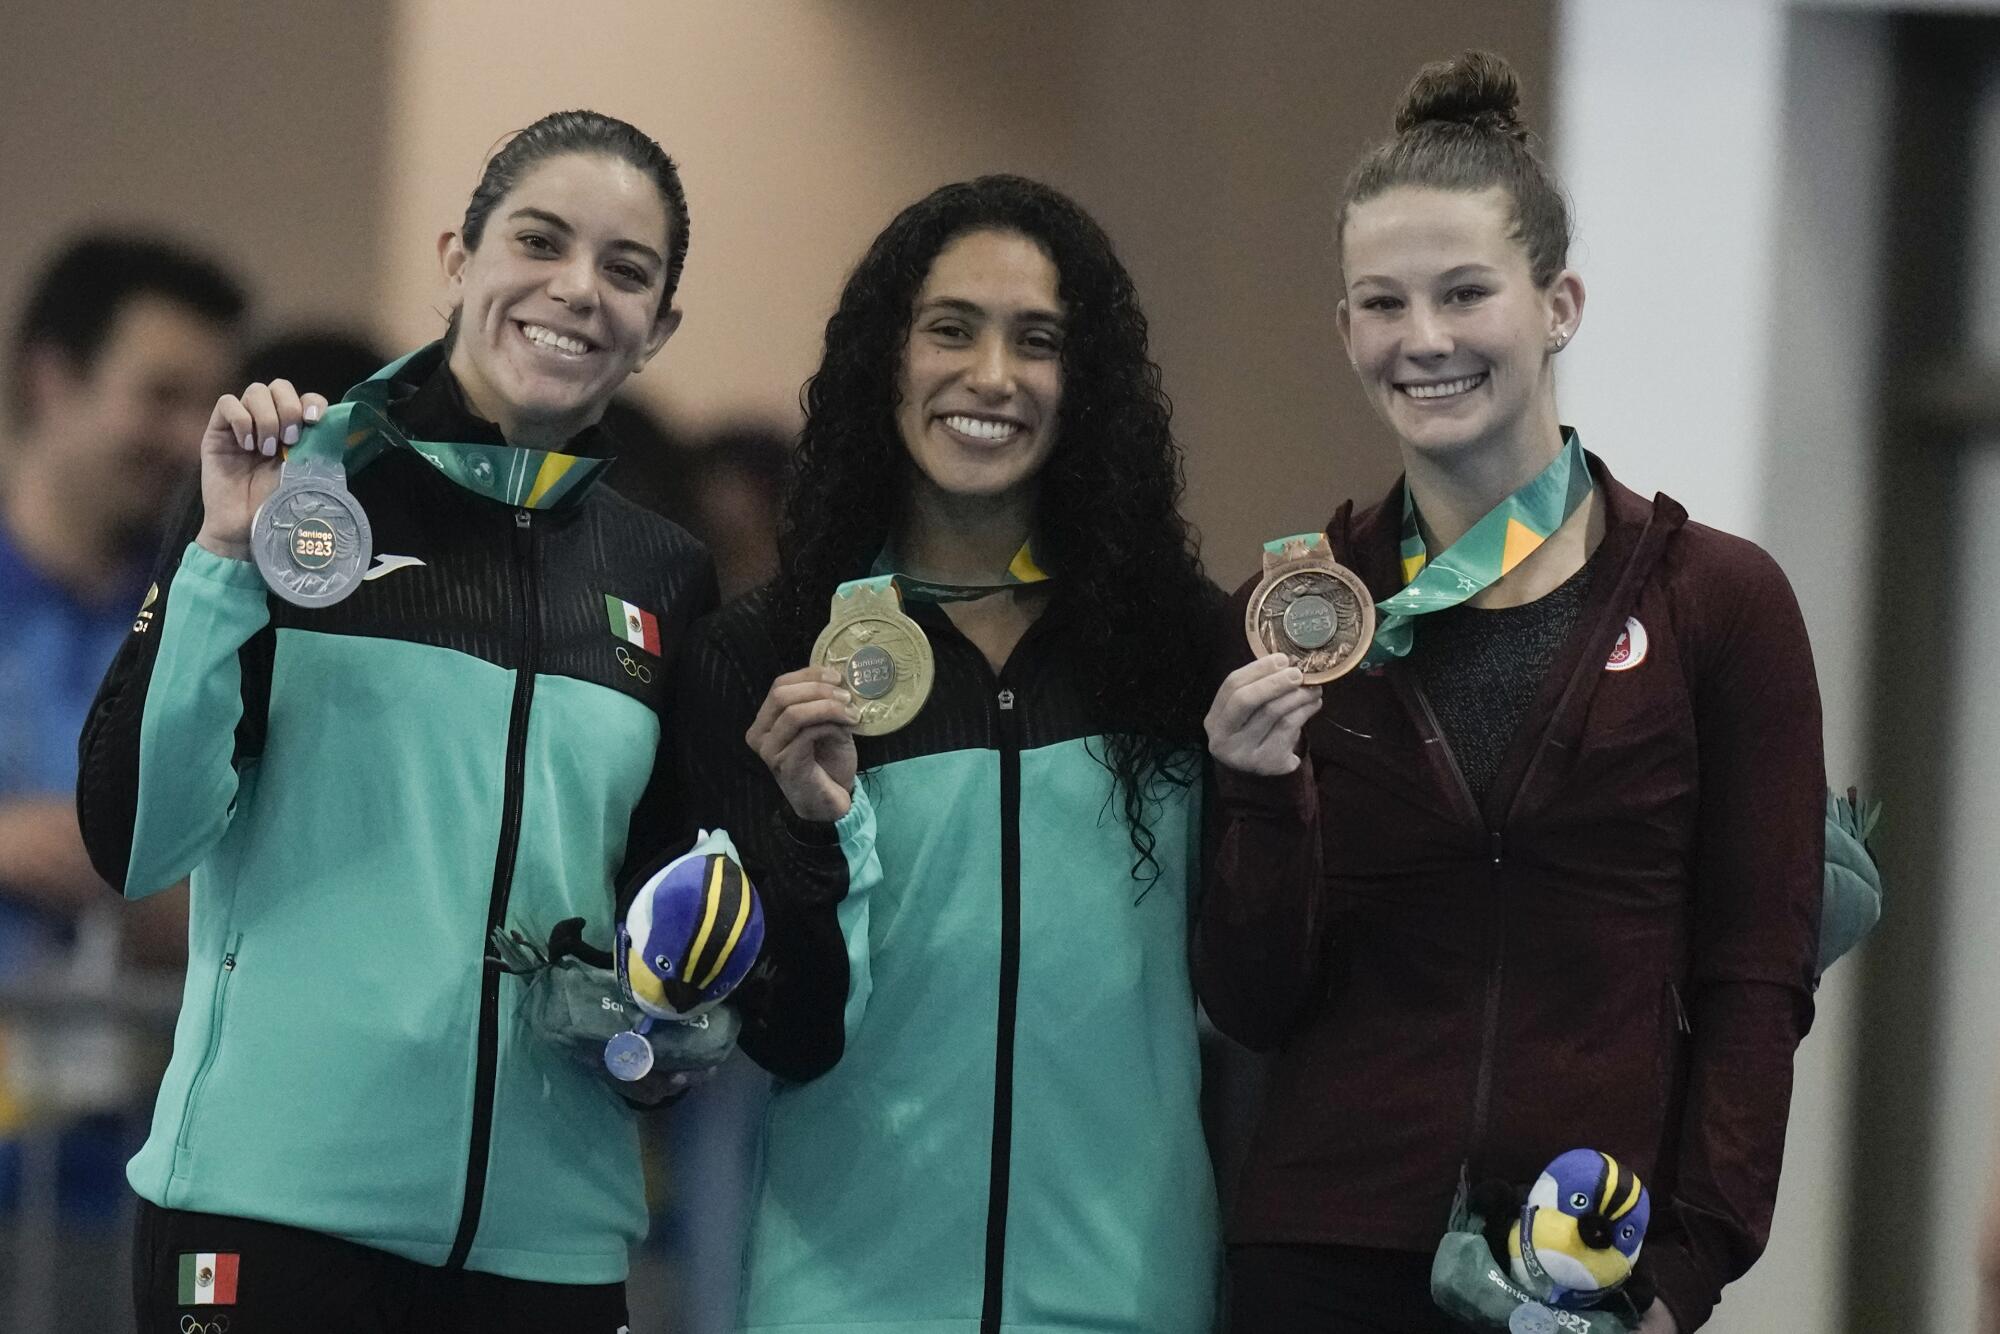 Gaby Agundez, center, holds her gold medal while standing next to silver medalist Alejandra Orozco, left, and Caeli Mckay.